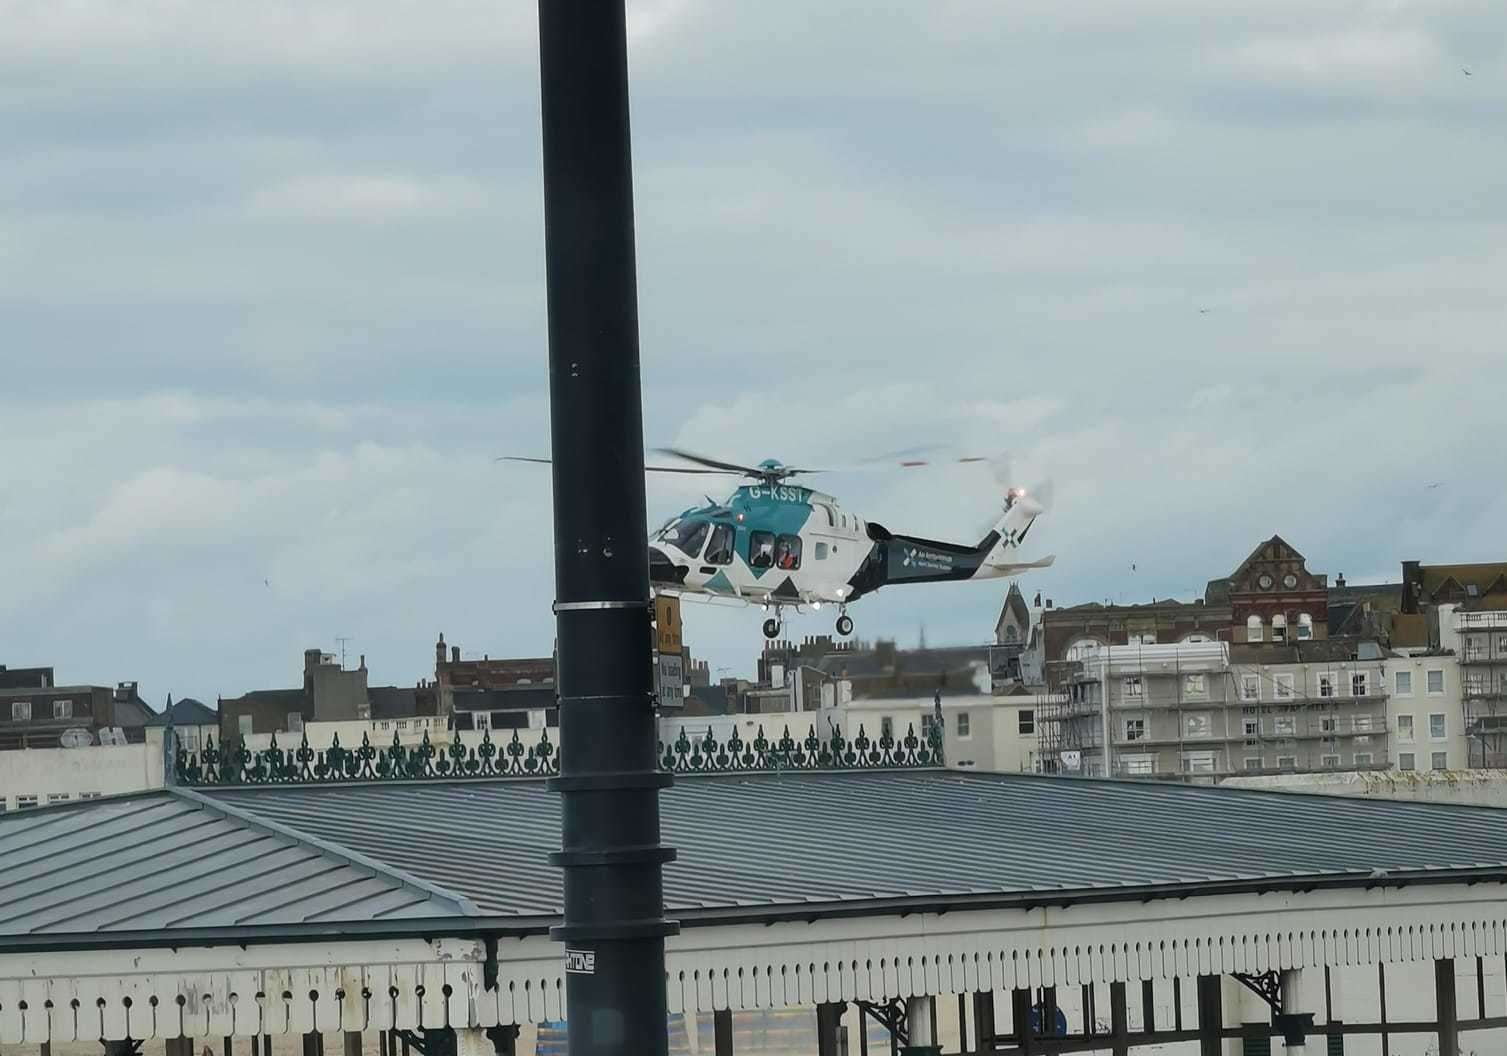 The helicopter was seen landing at Margate Beach this afternoon